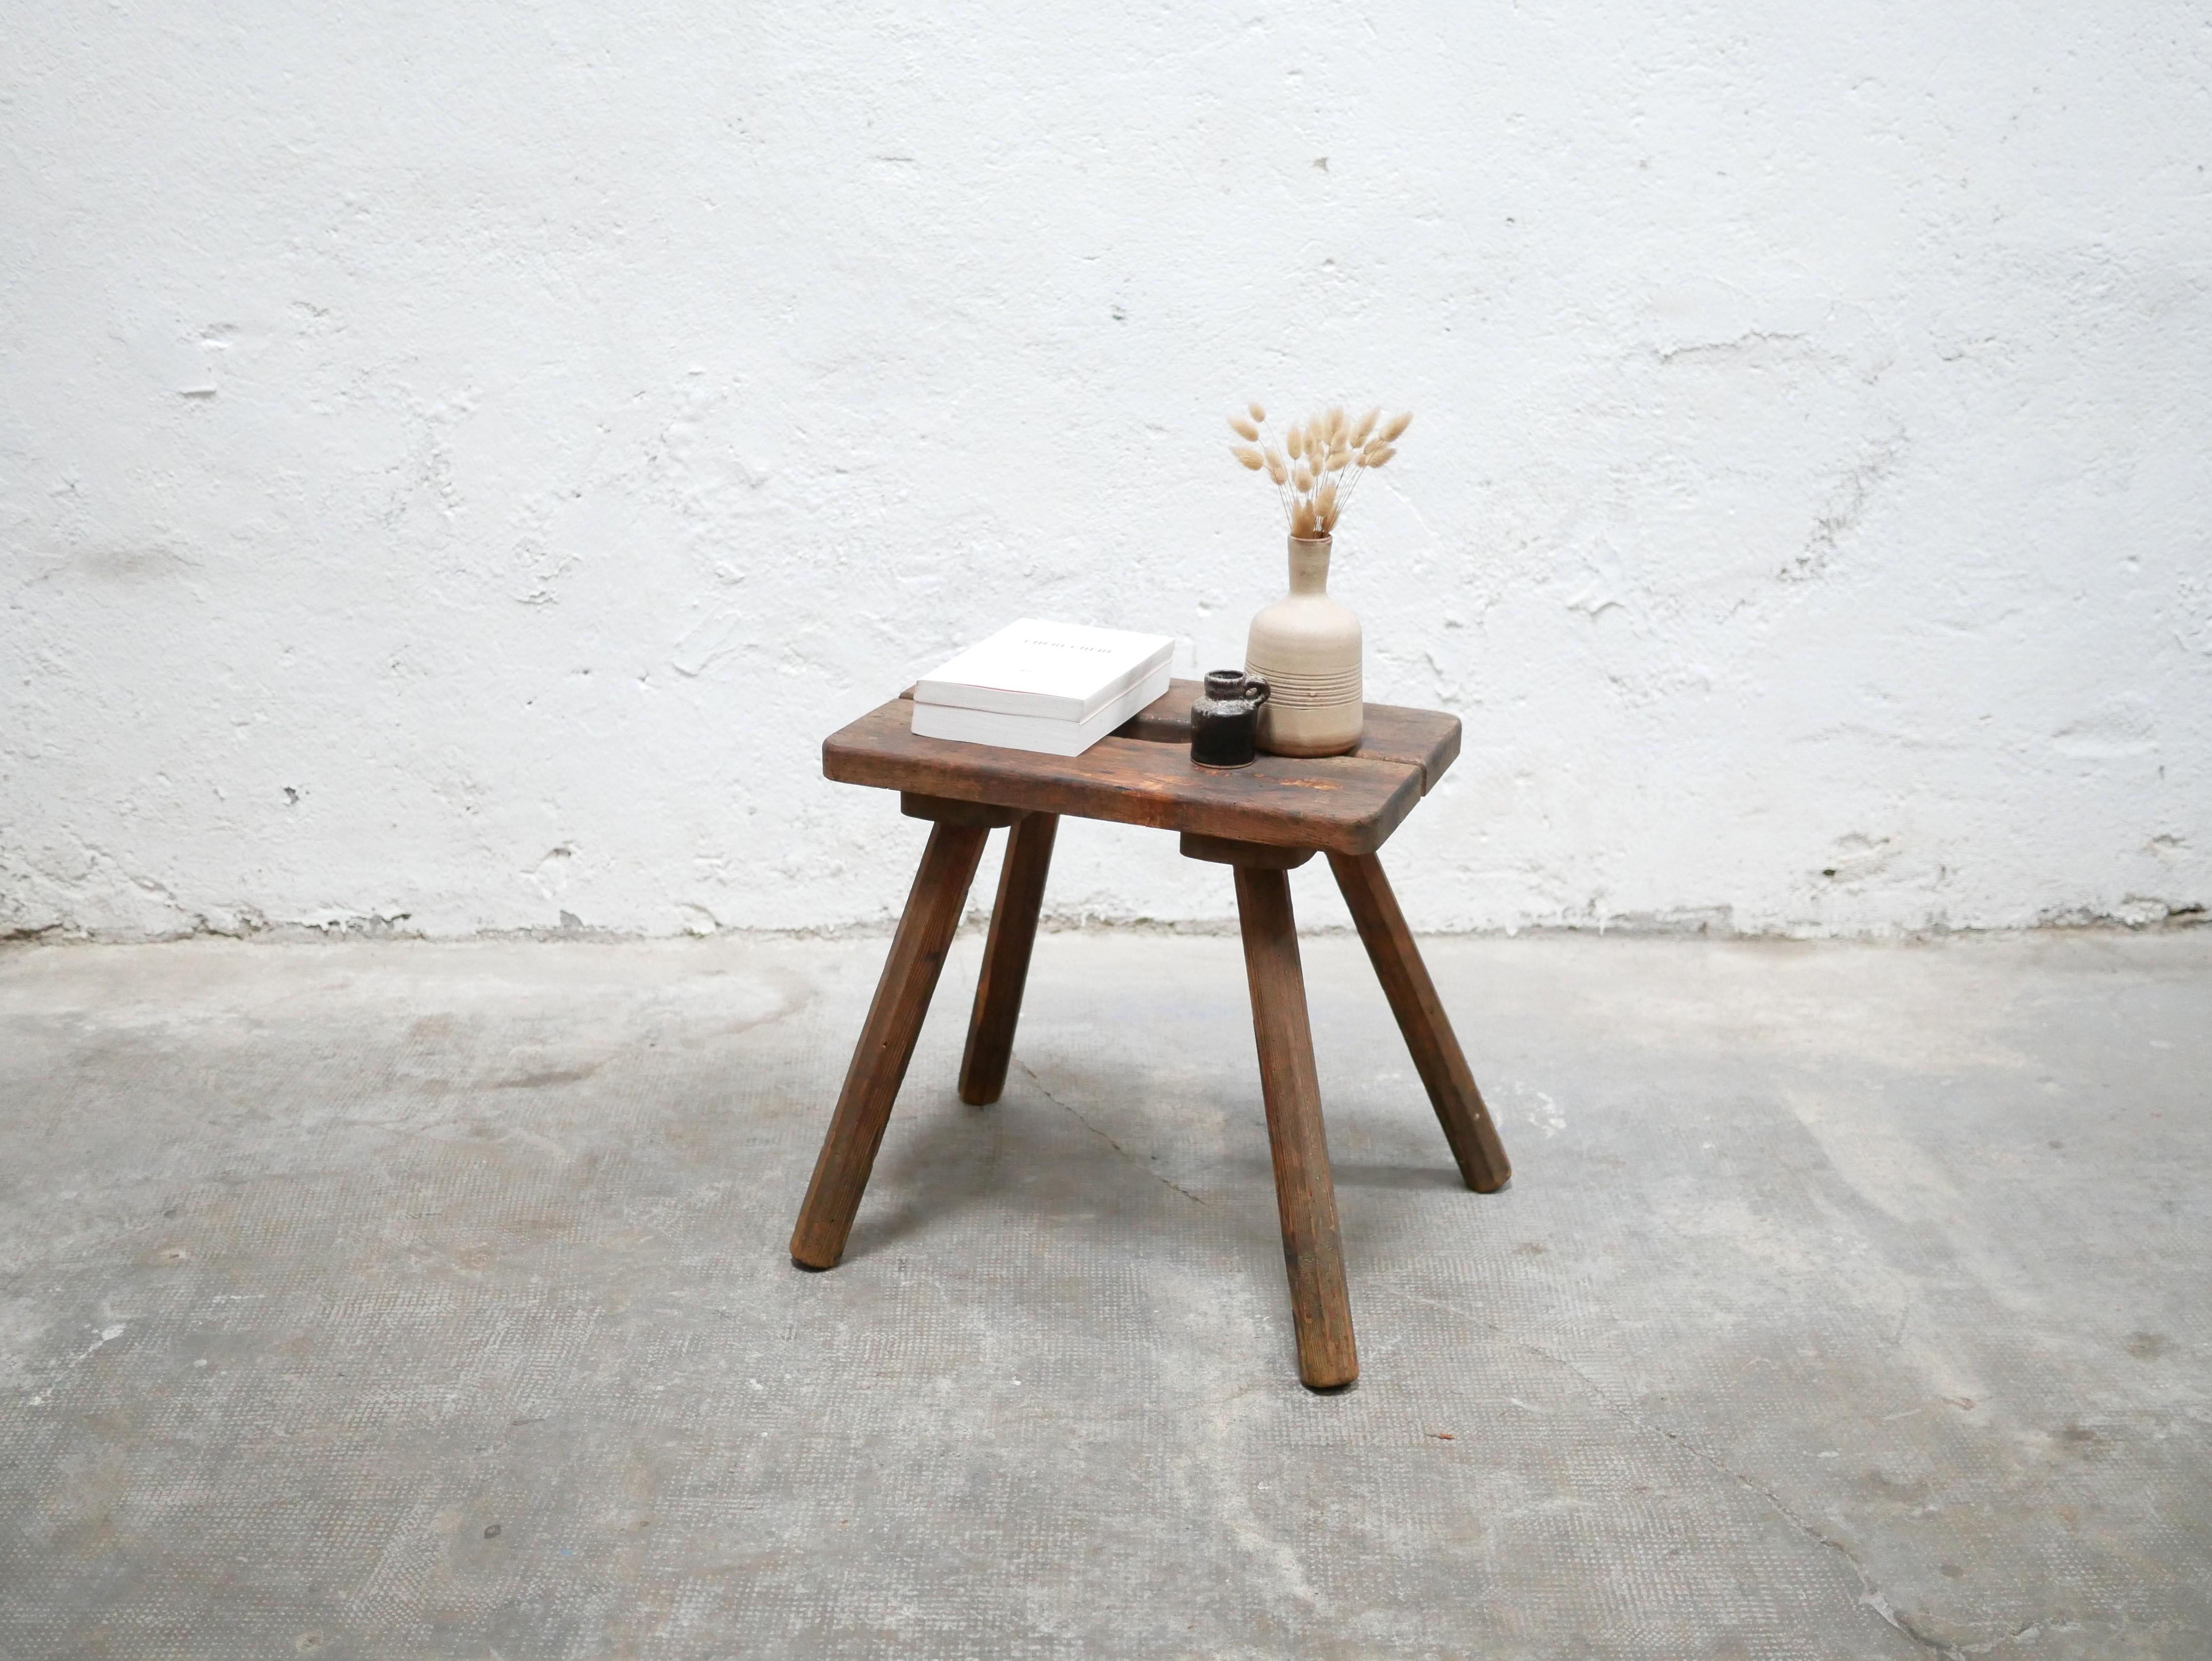 Wooden farm stool from the 1920s.

Its lines are trendy and modern.
Aesthetic, stable, solid and practical, the small stool will easily find its place in the living room as a side table, in the bedroom as a bedside table or in the